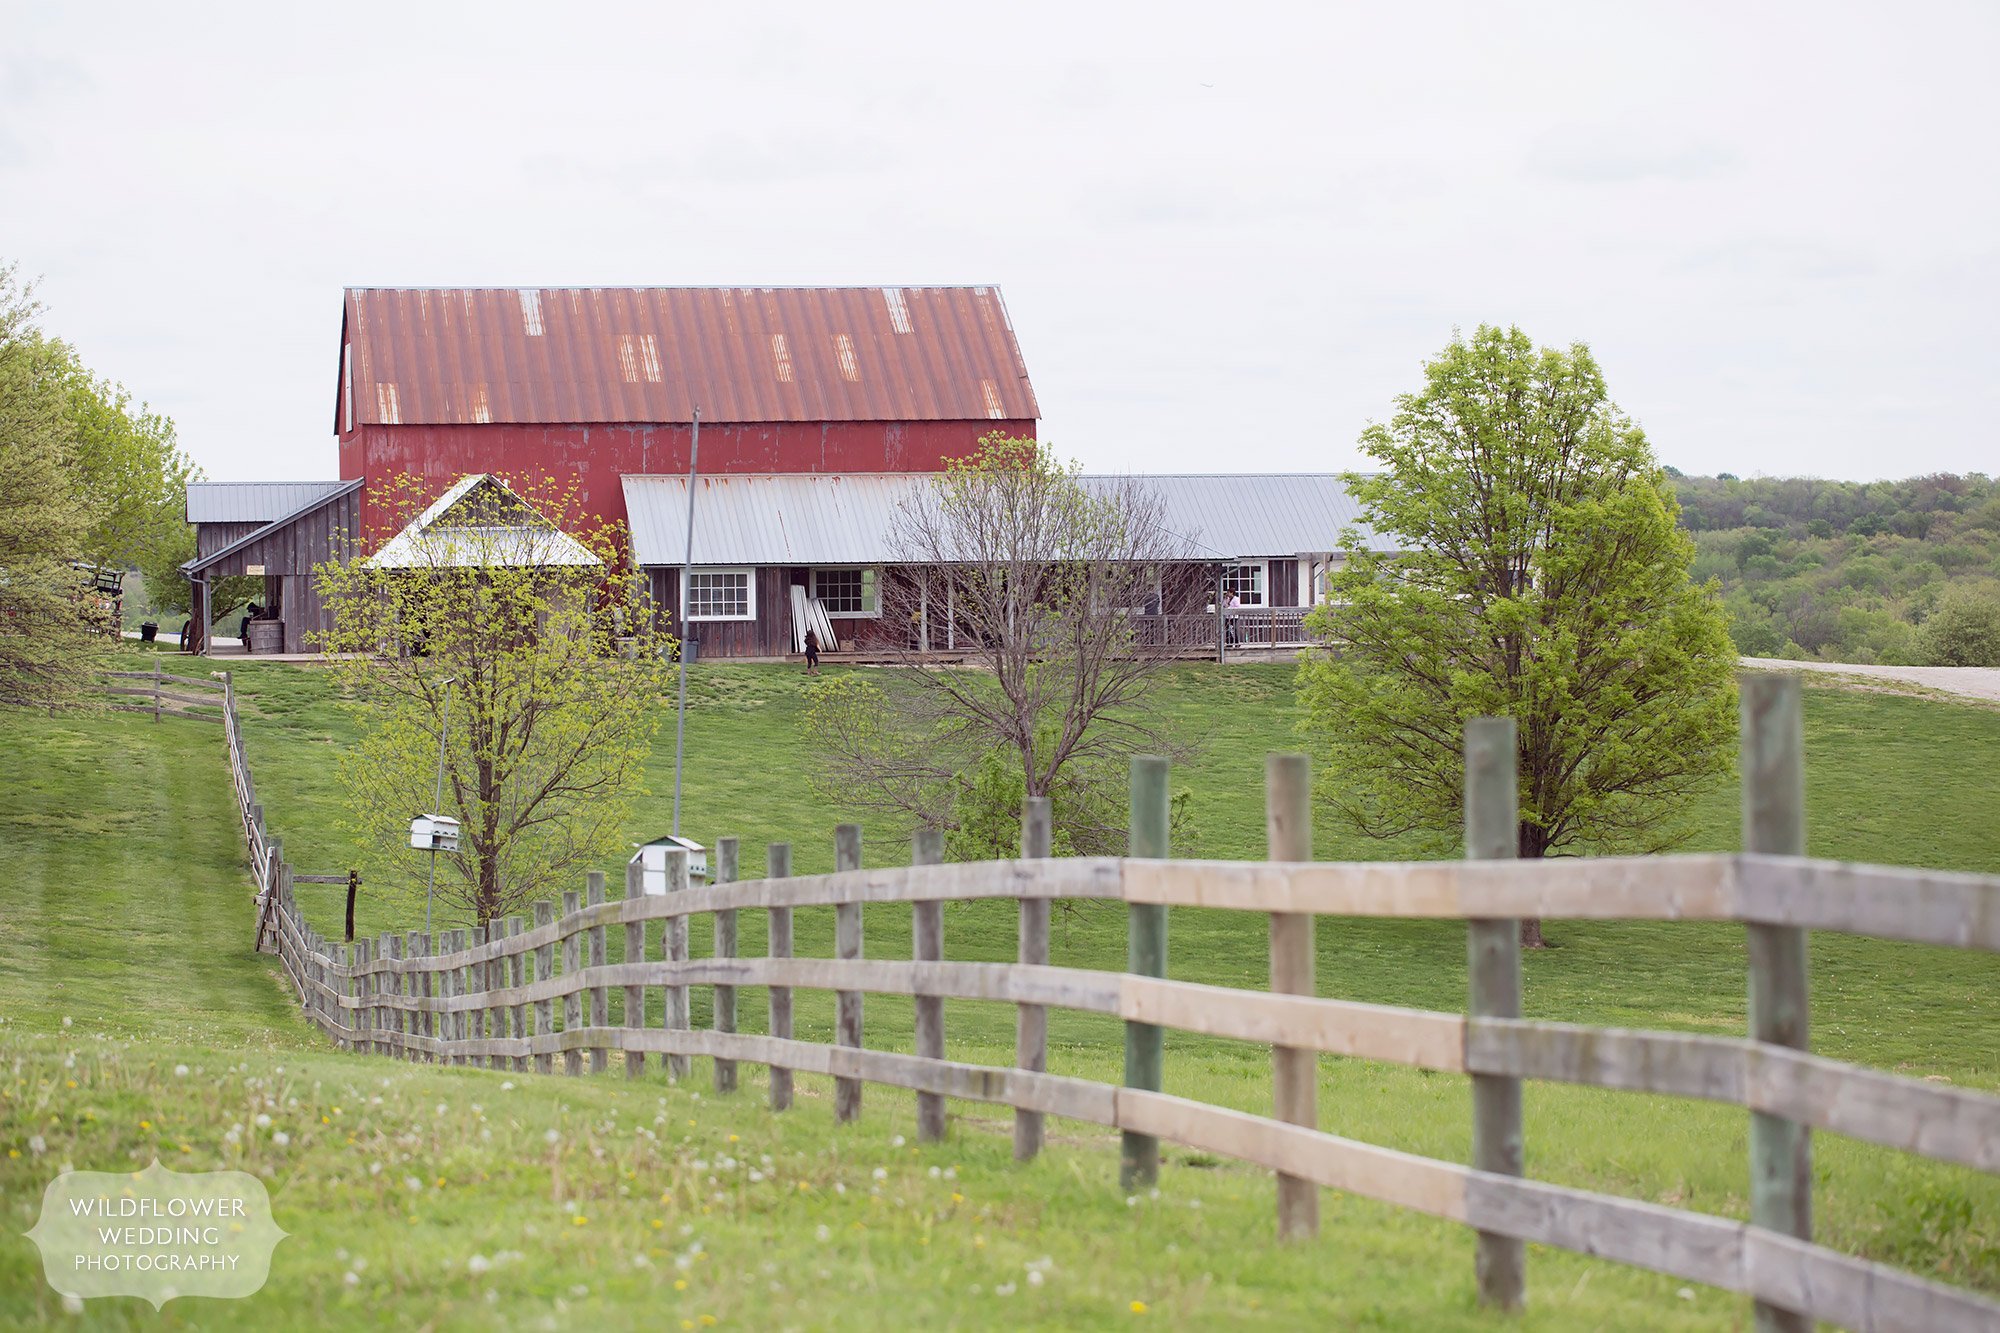 This place is the perfect natural and outdoor barn wedding venue just north of Kansas City.